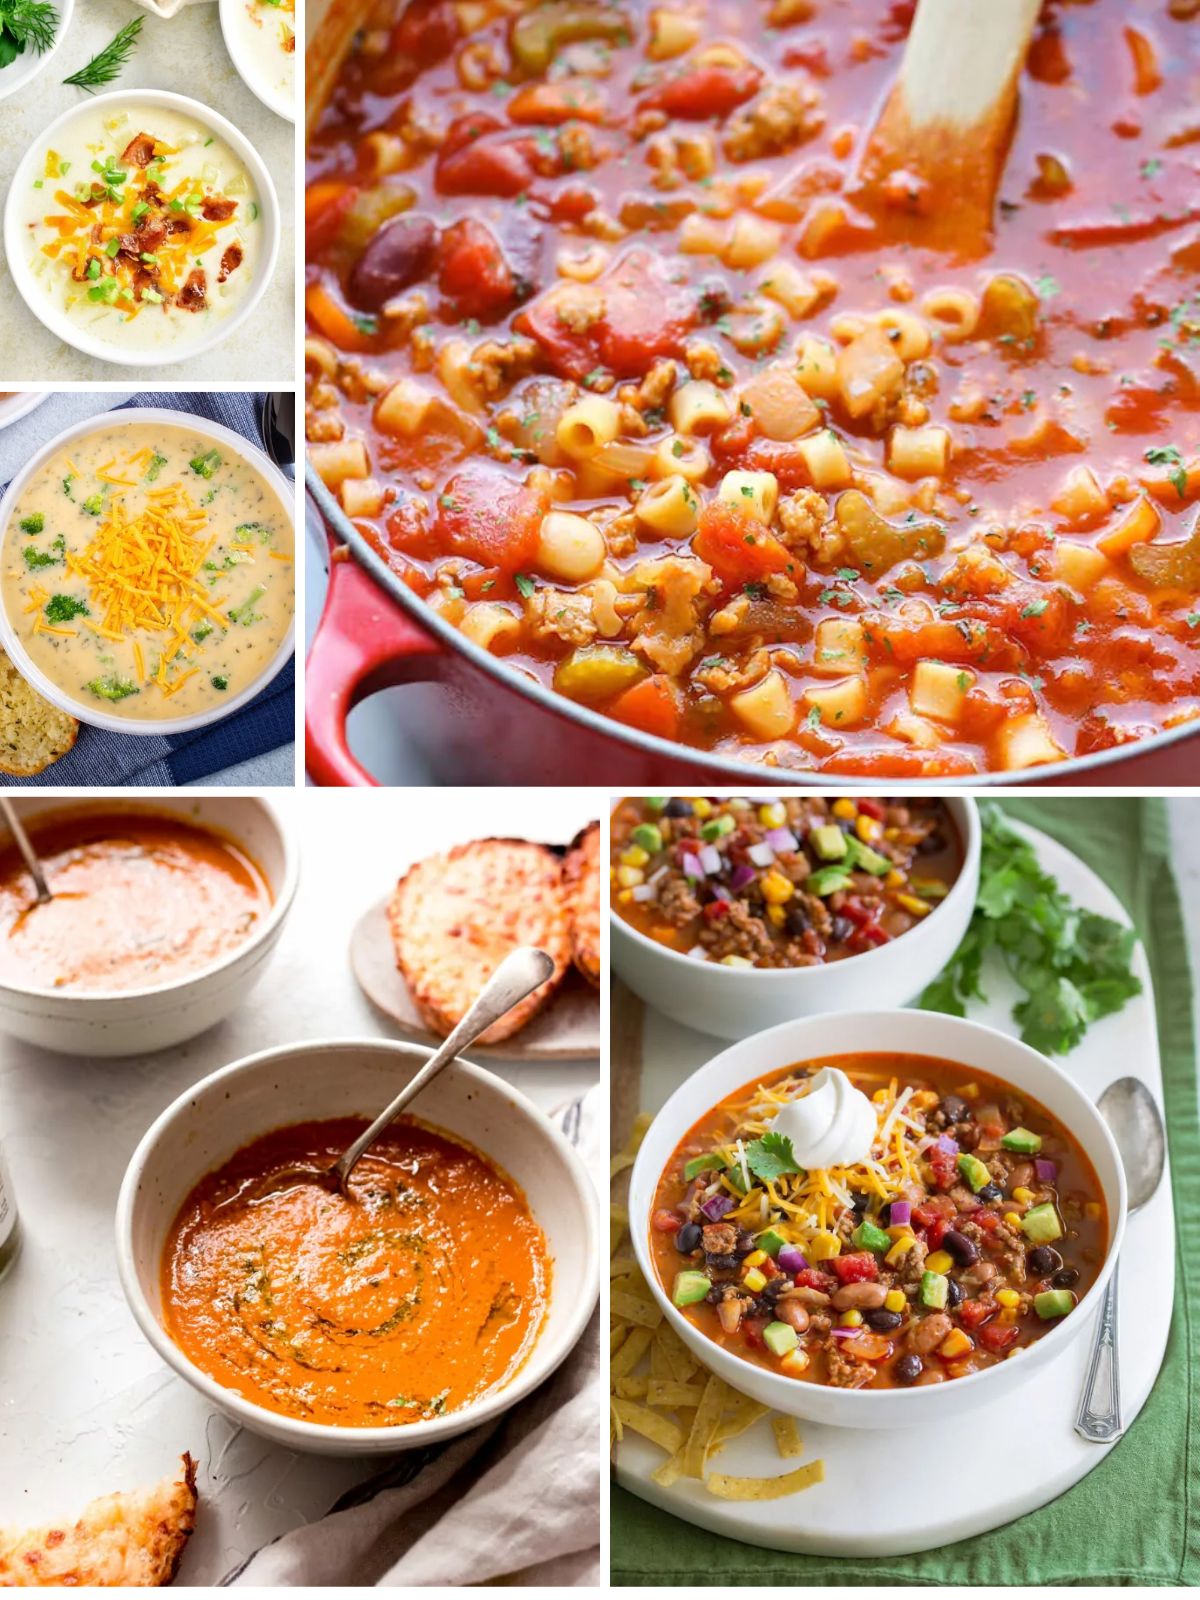 15 different soup photos for dinner.